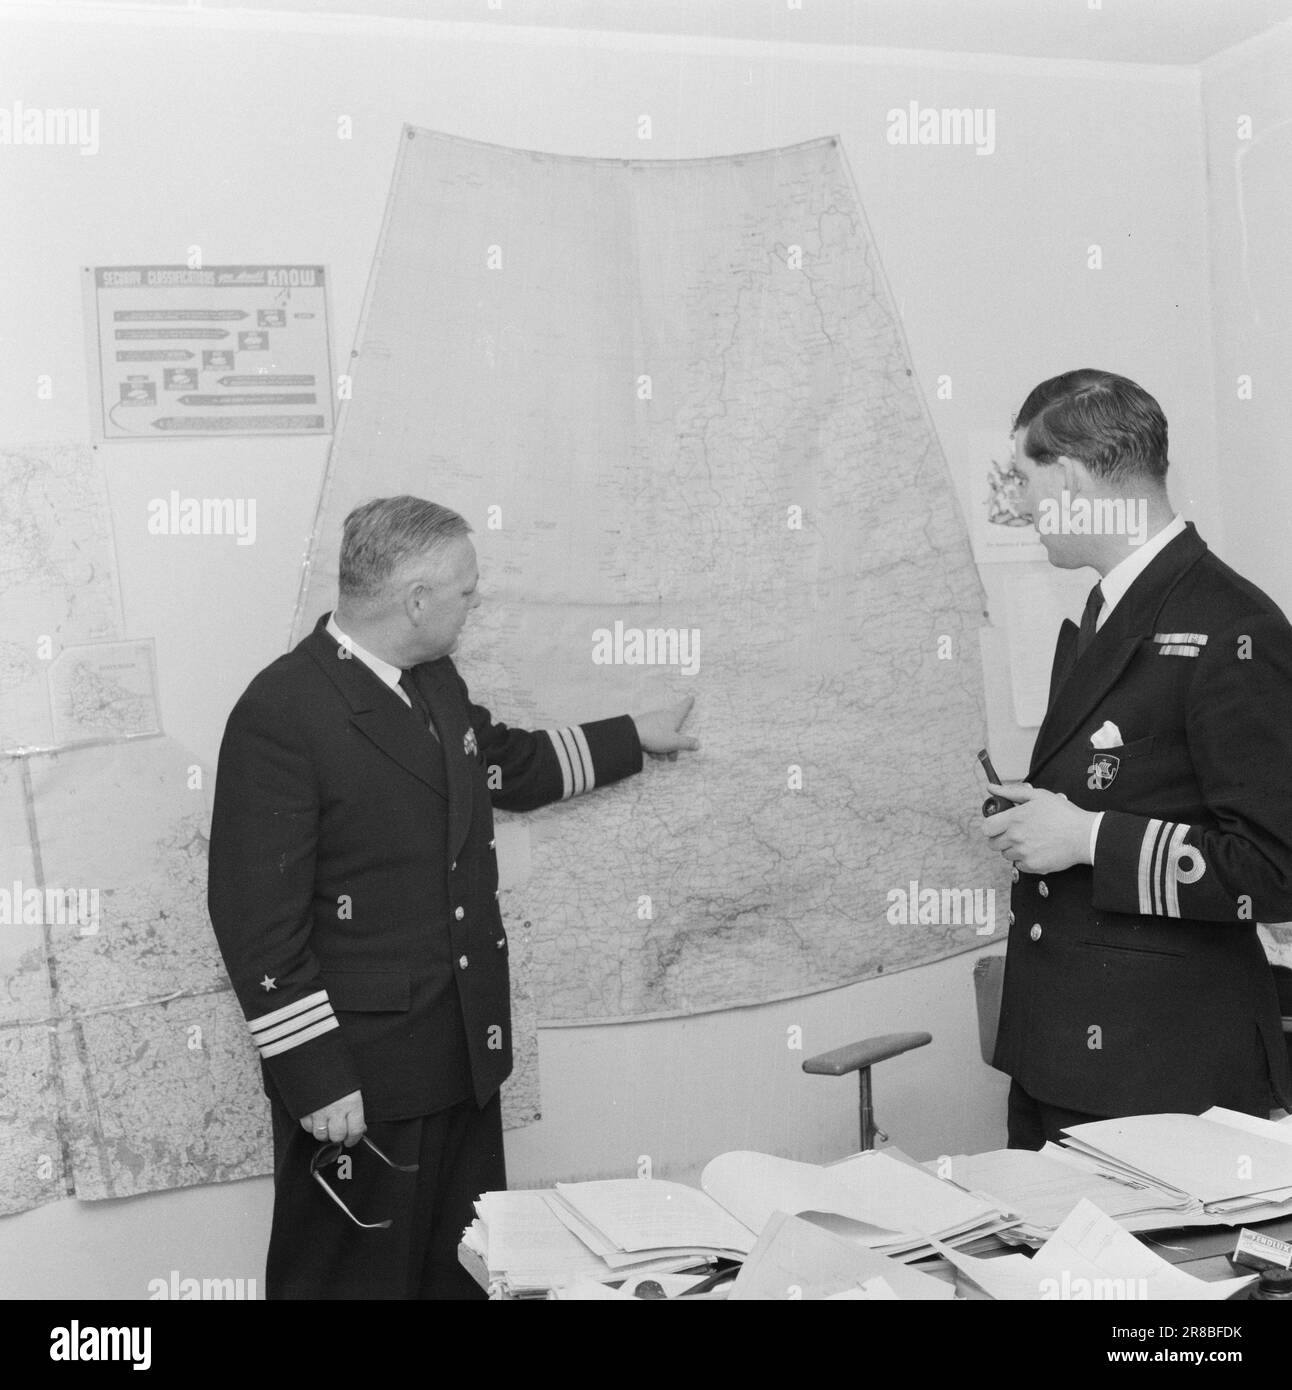 Actual 2-7-1960: Thank you, it's going great When the Storting decided that  the Northern Command's international staff of 700 men should also include  two Germans, there were a number of protests. German